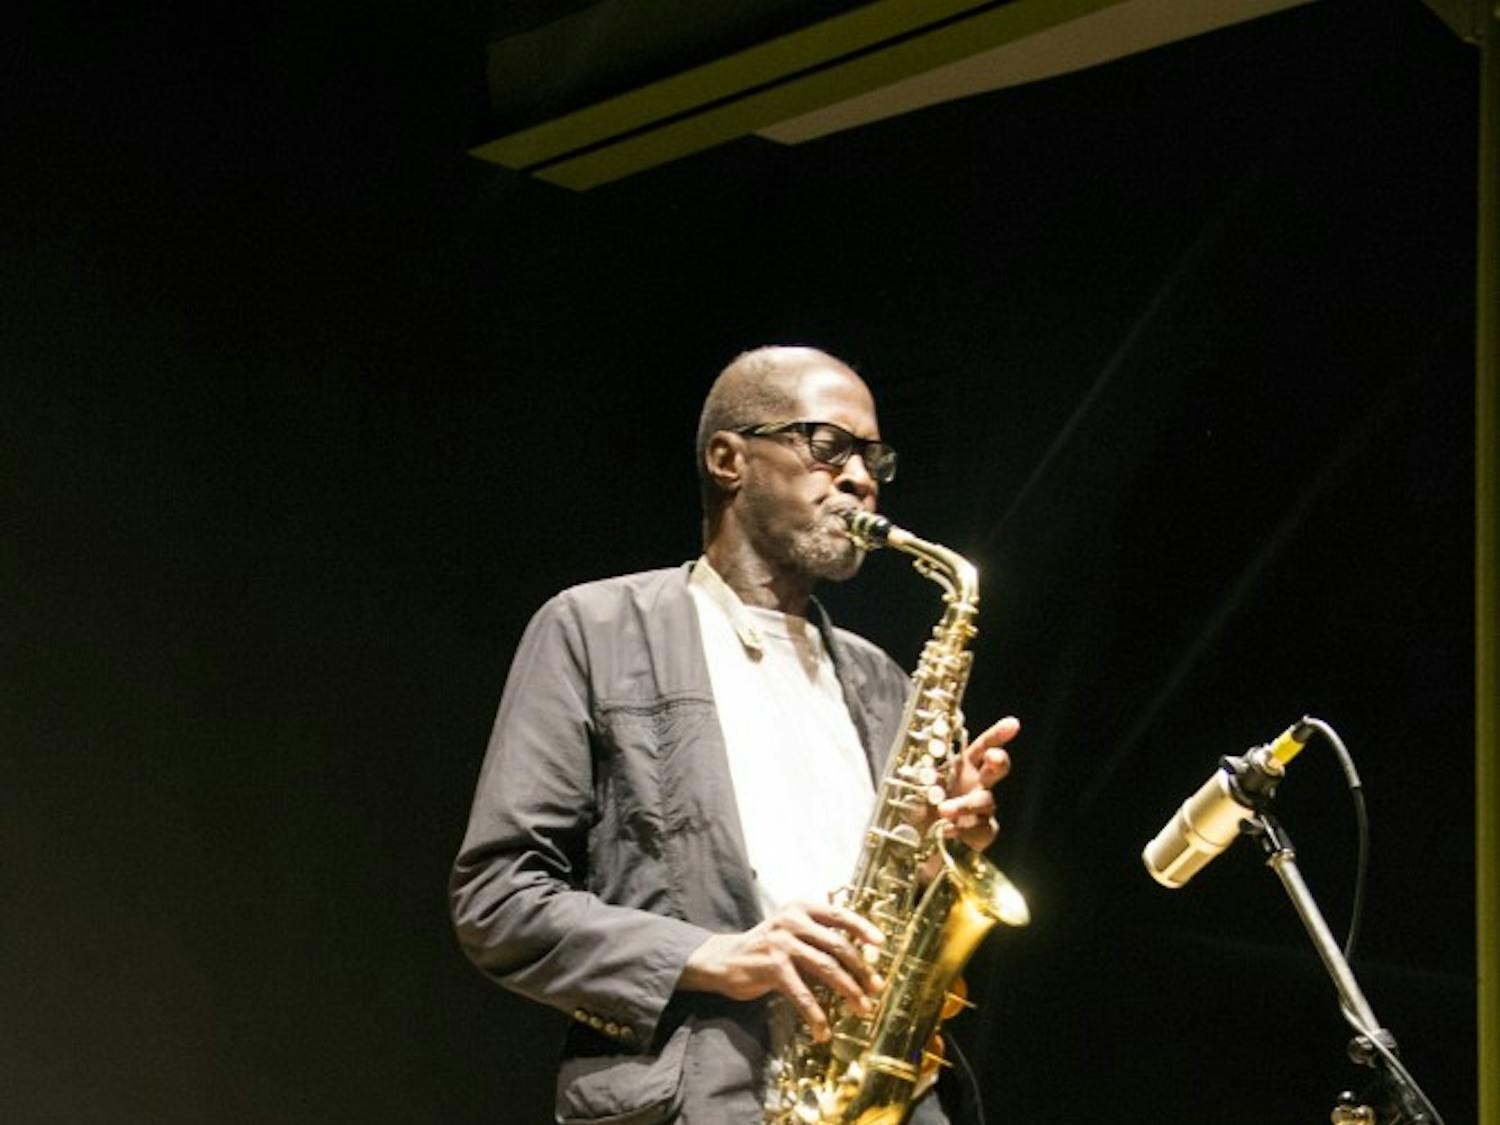 Charles Gayle, a free jazz multi-instrumentalist, performed at Hallwalls Contemporary Arts Center on Friday night. The artist, whose career spans as far back as the ‘60s, intimately played with expression in mind on the piano and saxophone.